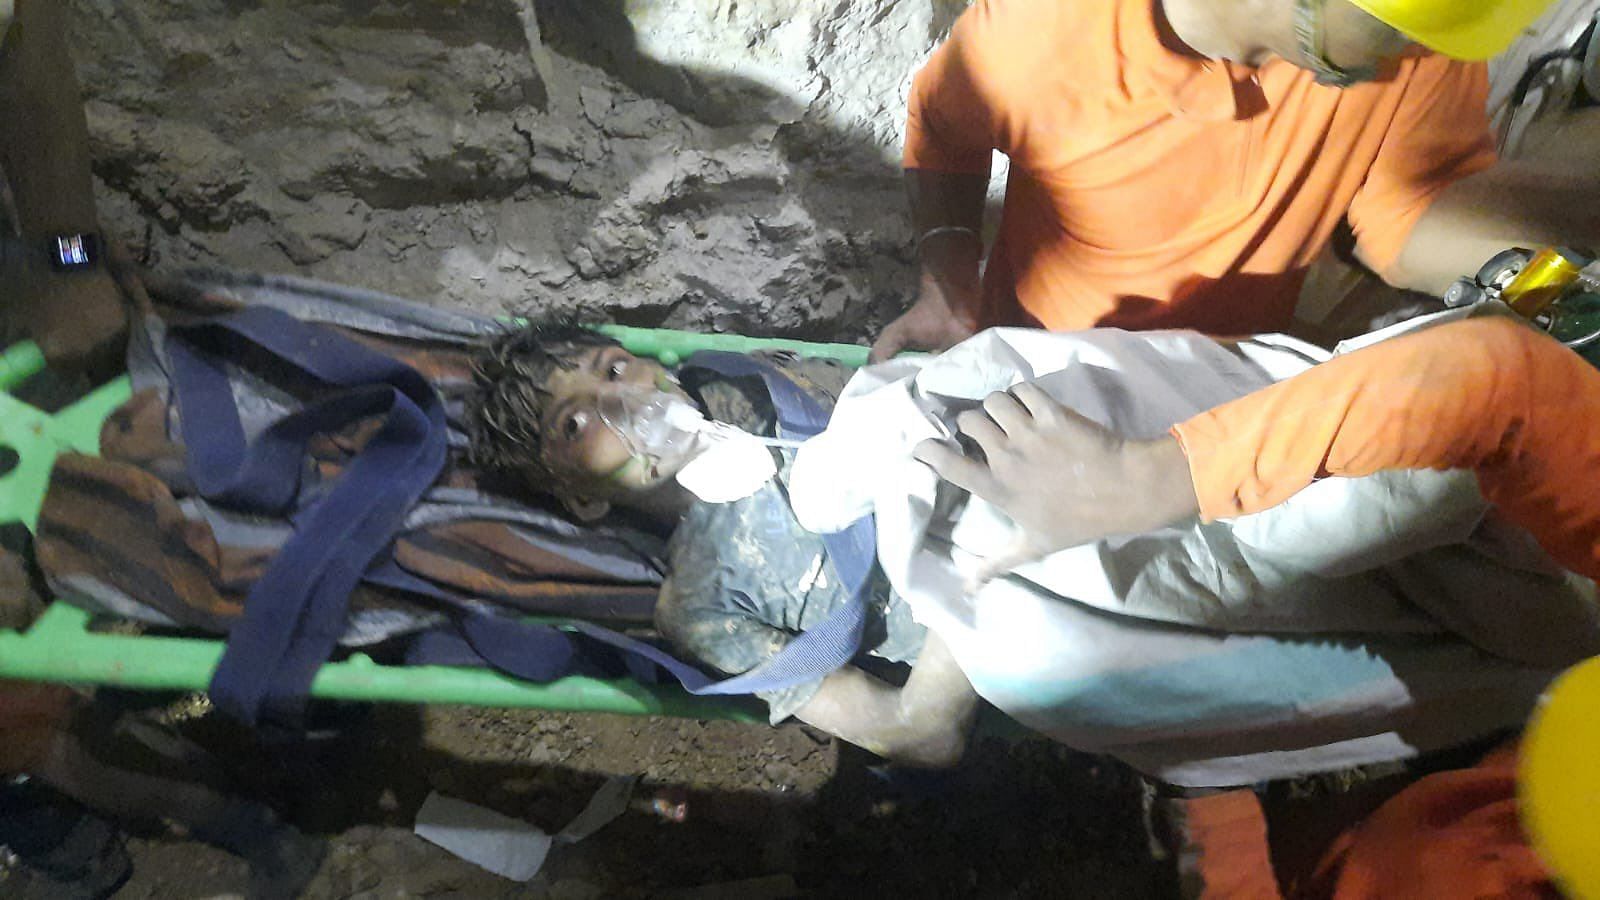 <div class="paragraphs"><p>Rahul Sahu, an 11-year-old boy who had fallen into a borewell in Chhattisgarh’s Janjgir Champa district, was rescued after a 104-hour-long operation on Tuesday night, 14 June.</p></div>